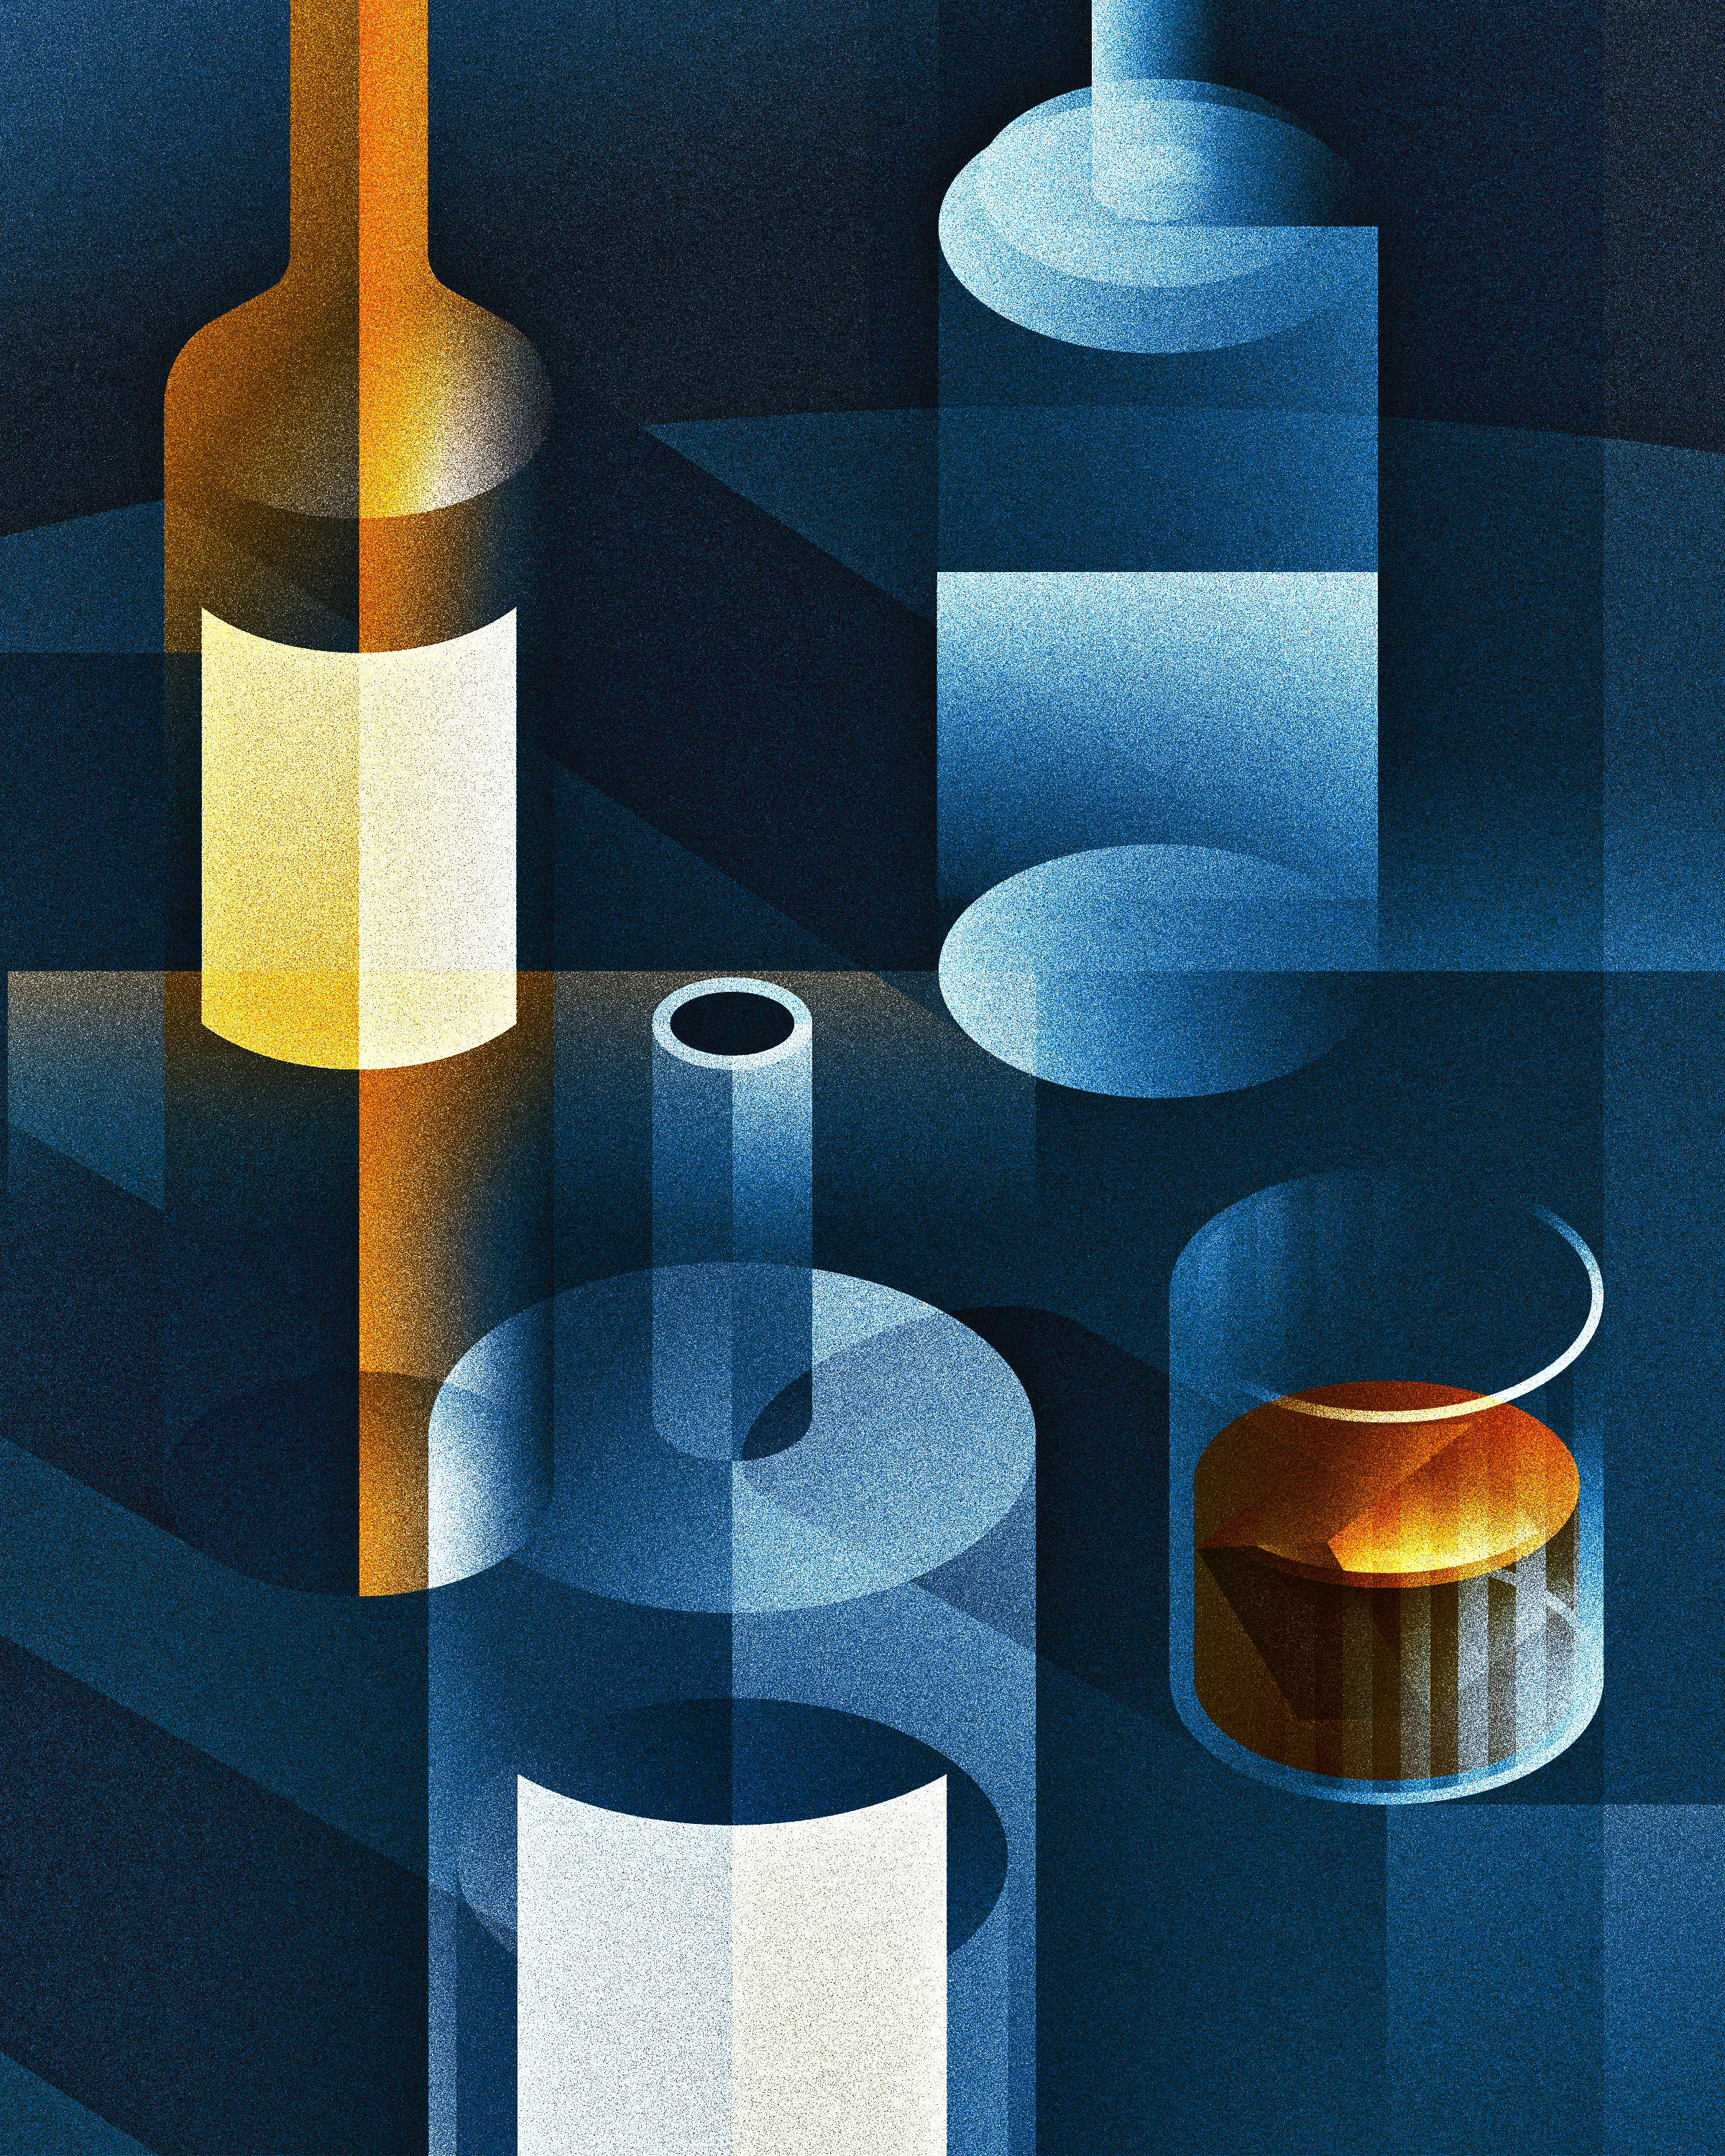 art deco cocktail by Nick Matej on Dribbble